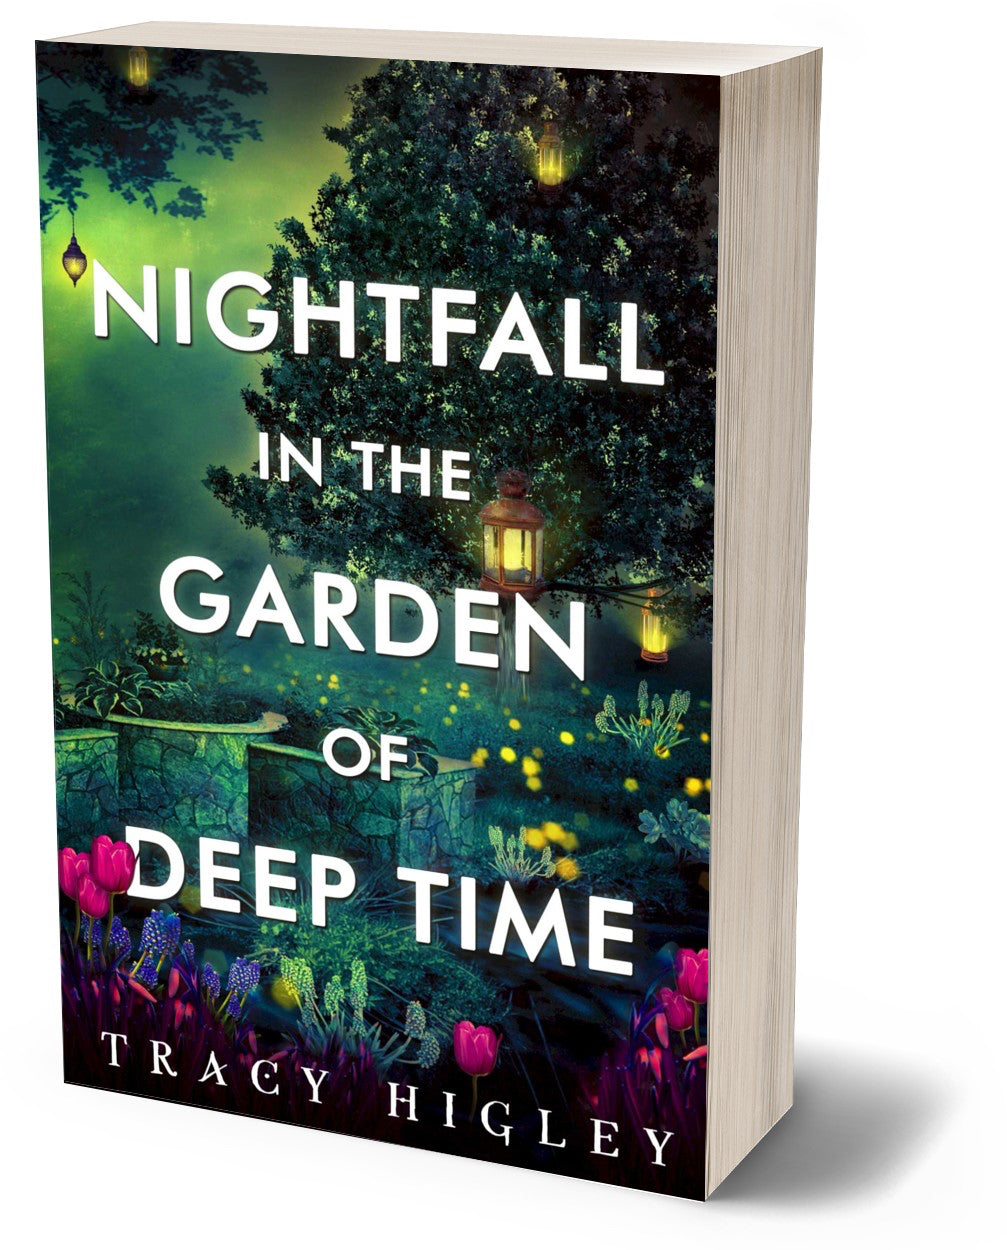 Nightfall in the Garden of Deep Time (paperback)